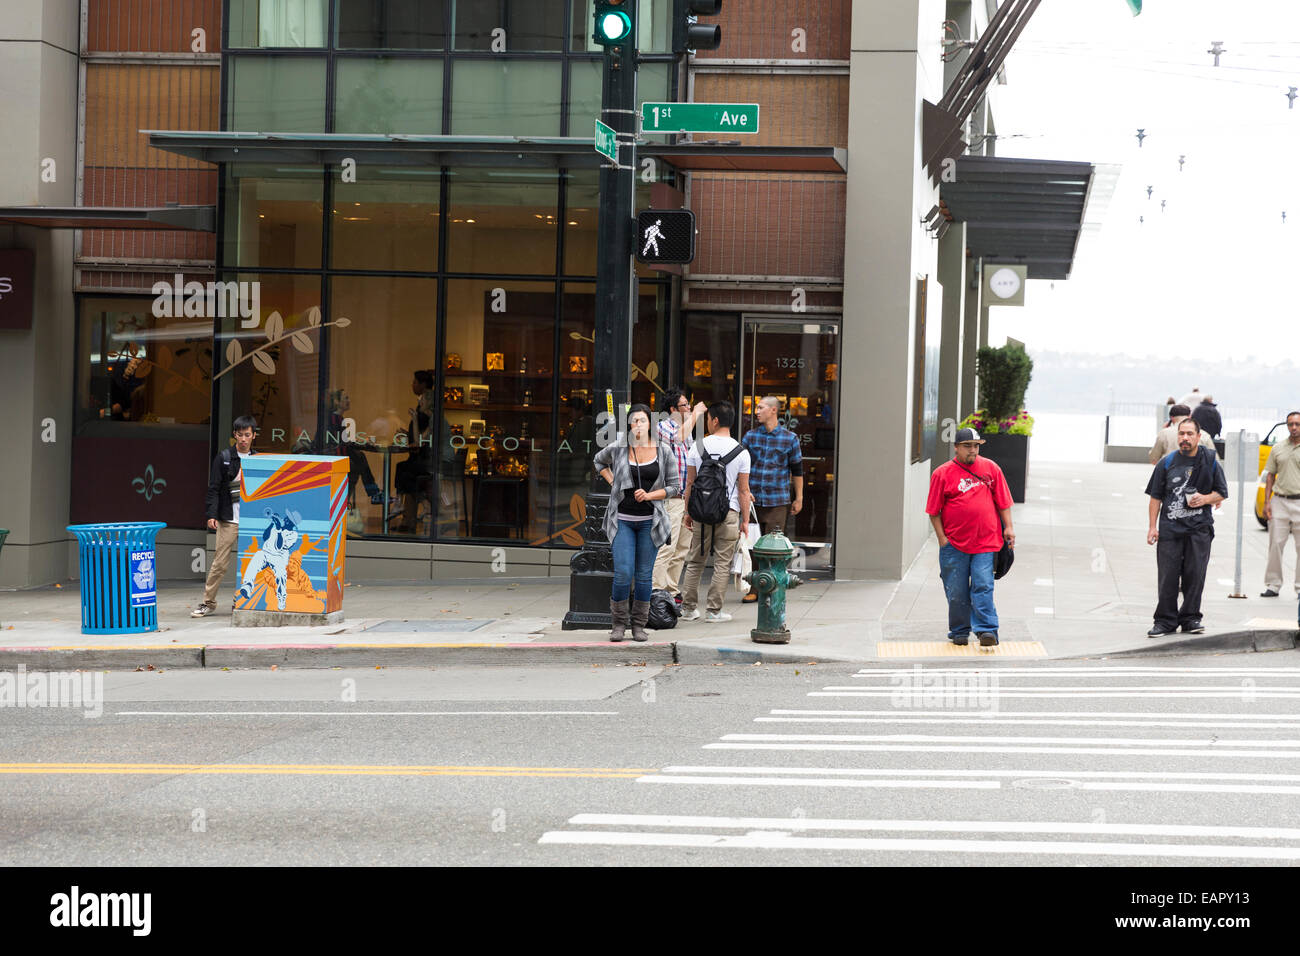 People waiting on a green light to cross a street in Seattle, Washington Stock Photo